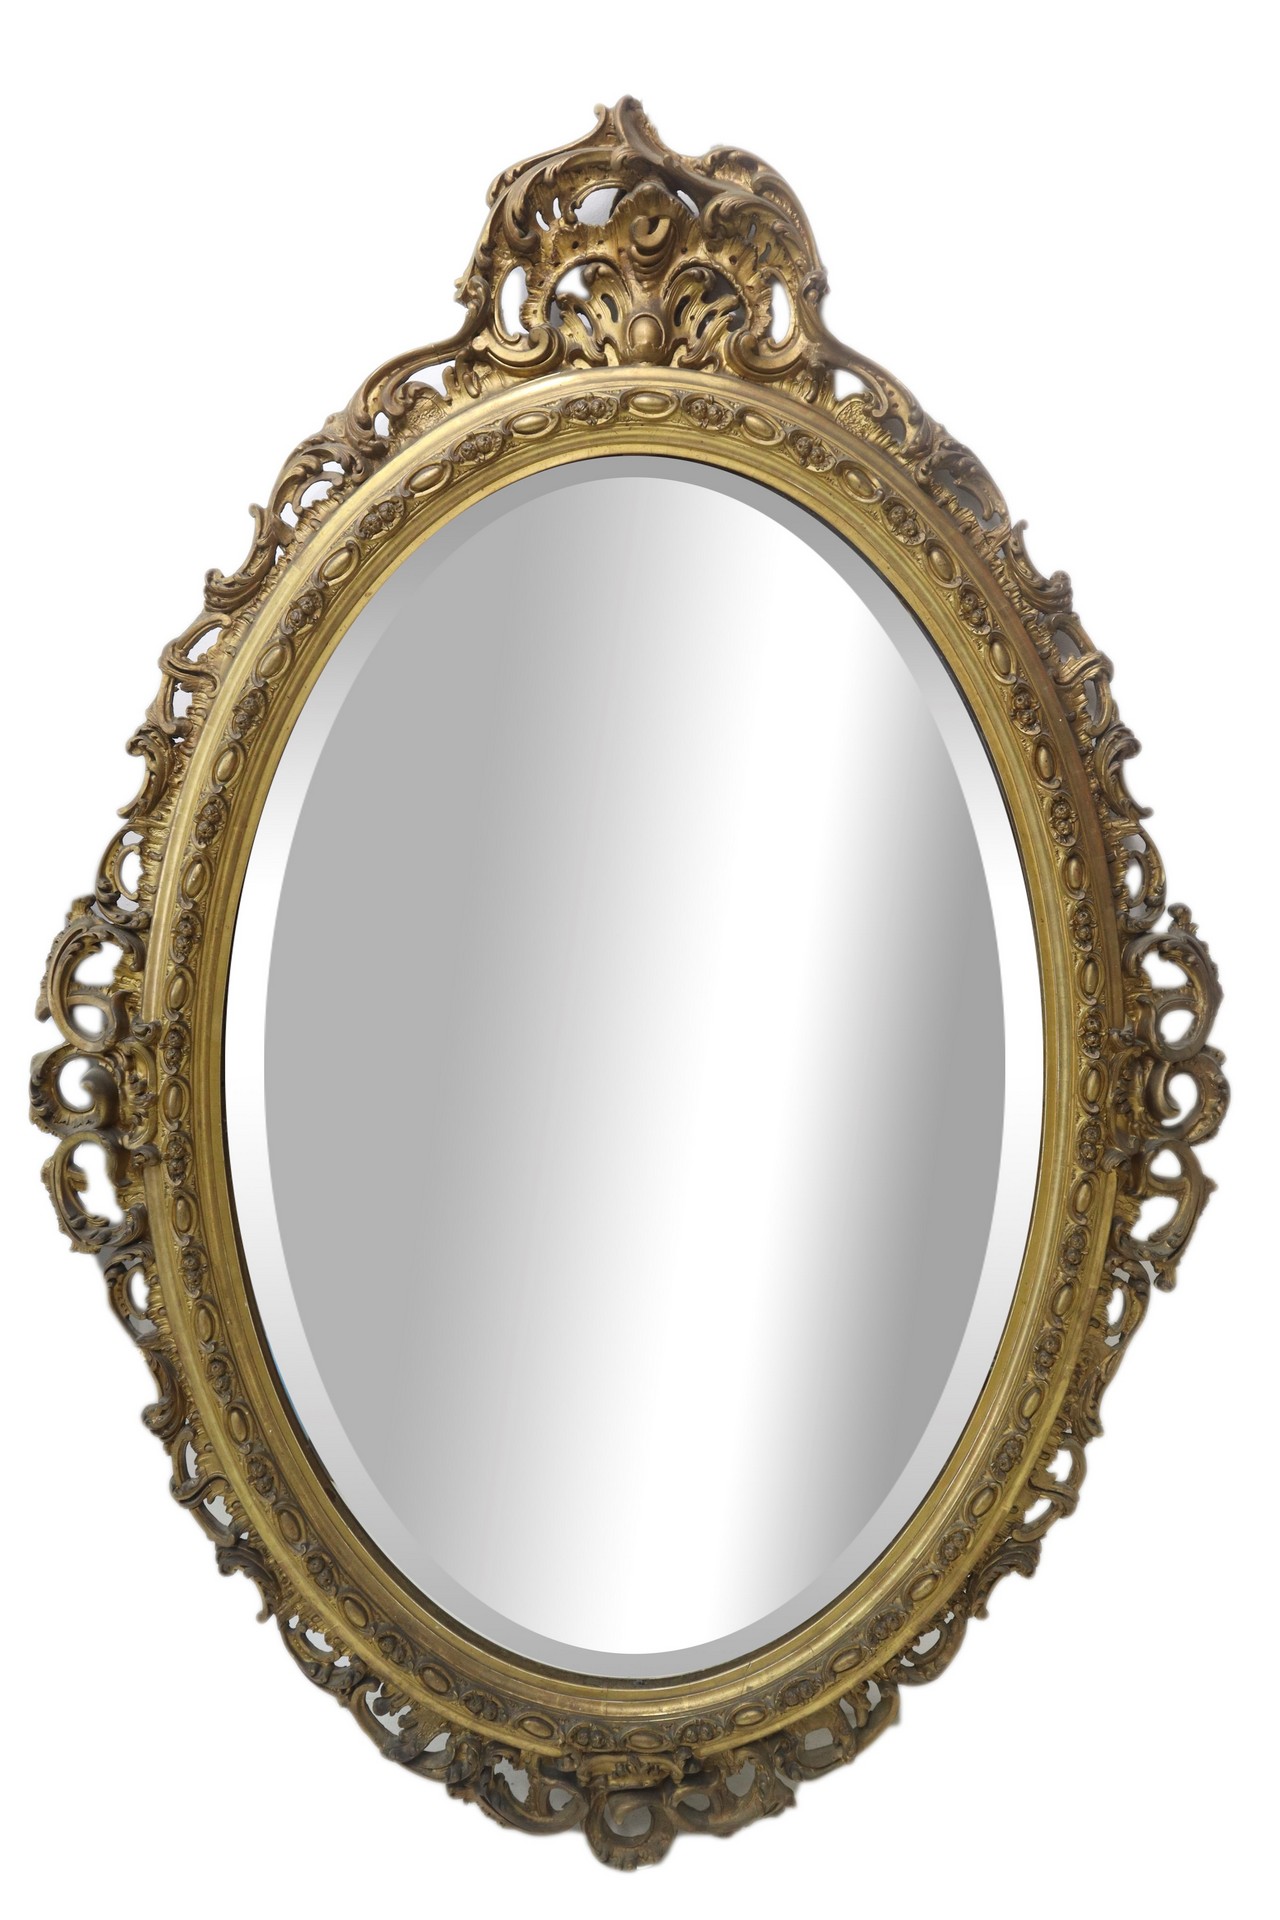 Oval mirror in gilded wood, Late 19th century